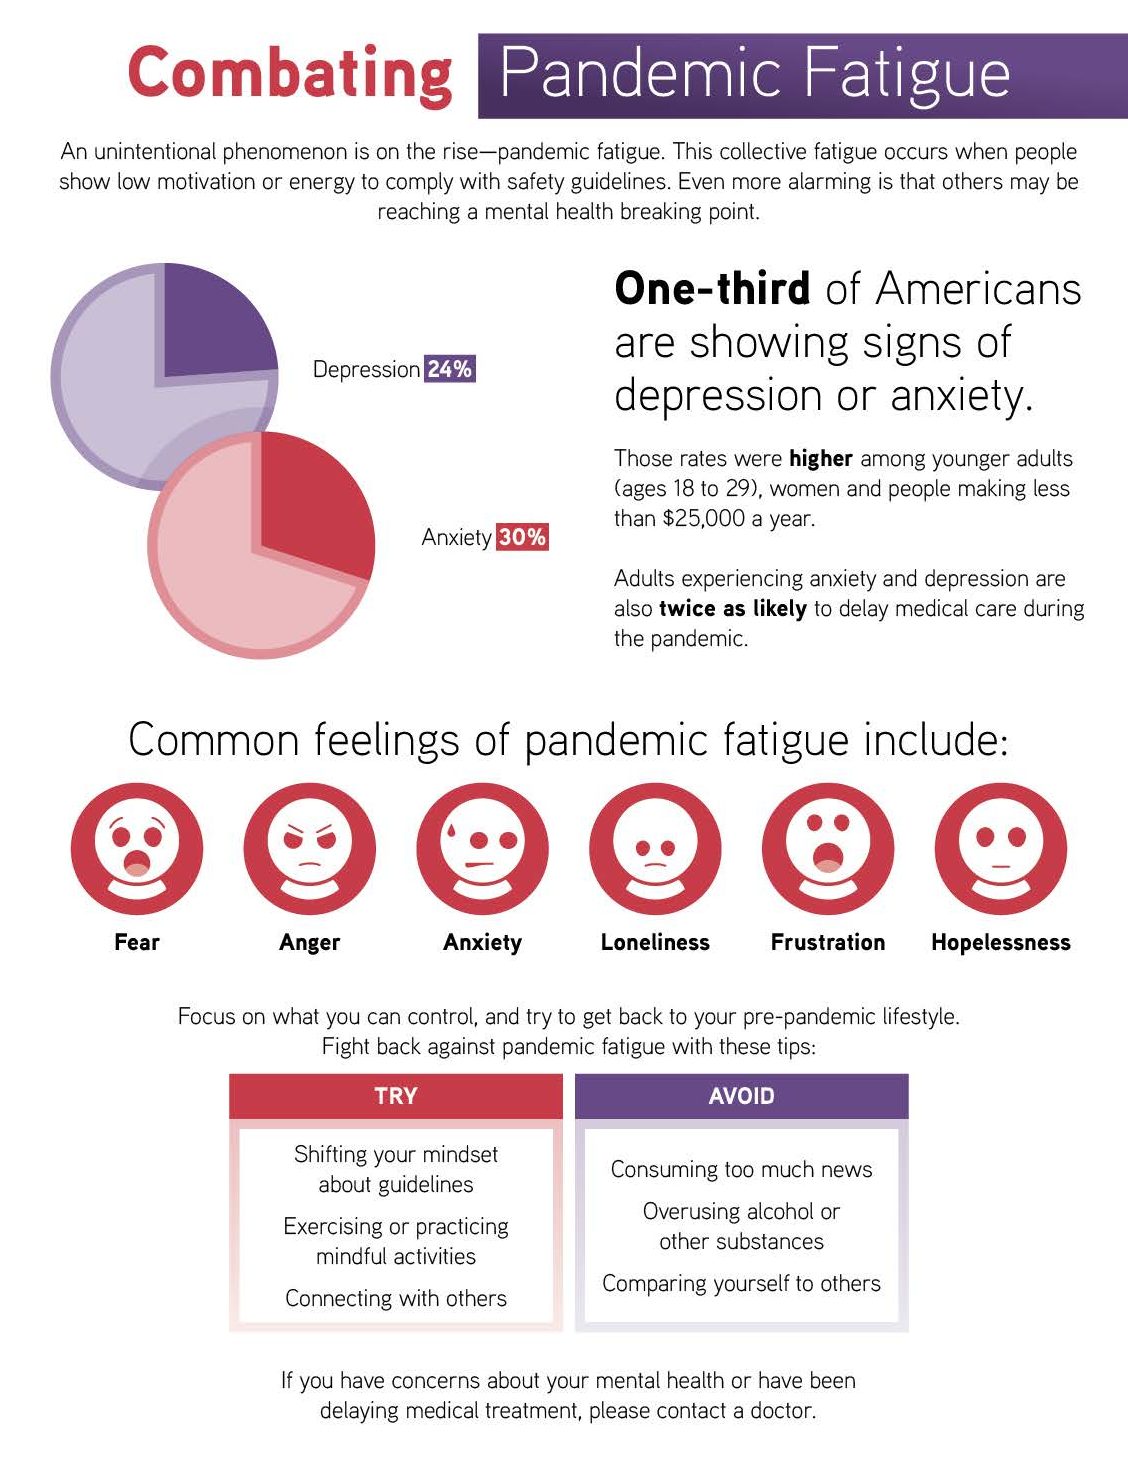 Combating Pandemic Fatigue Infographic